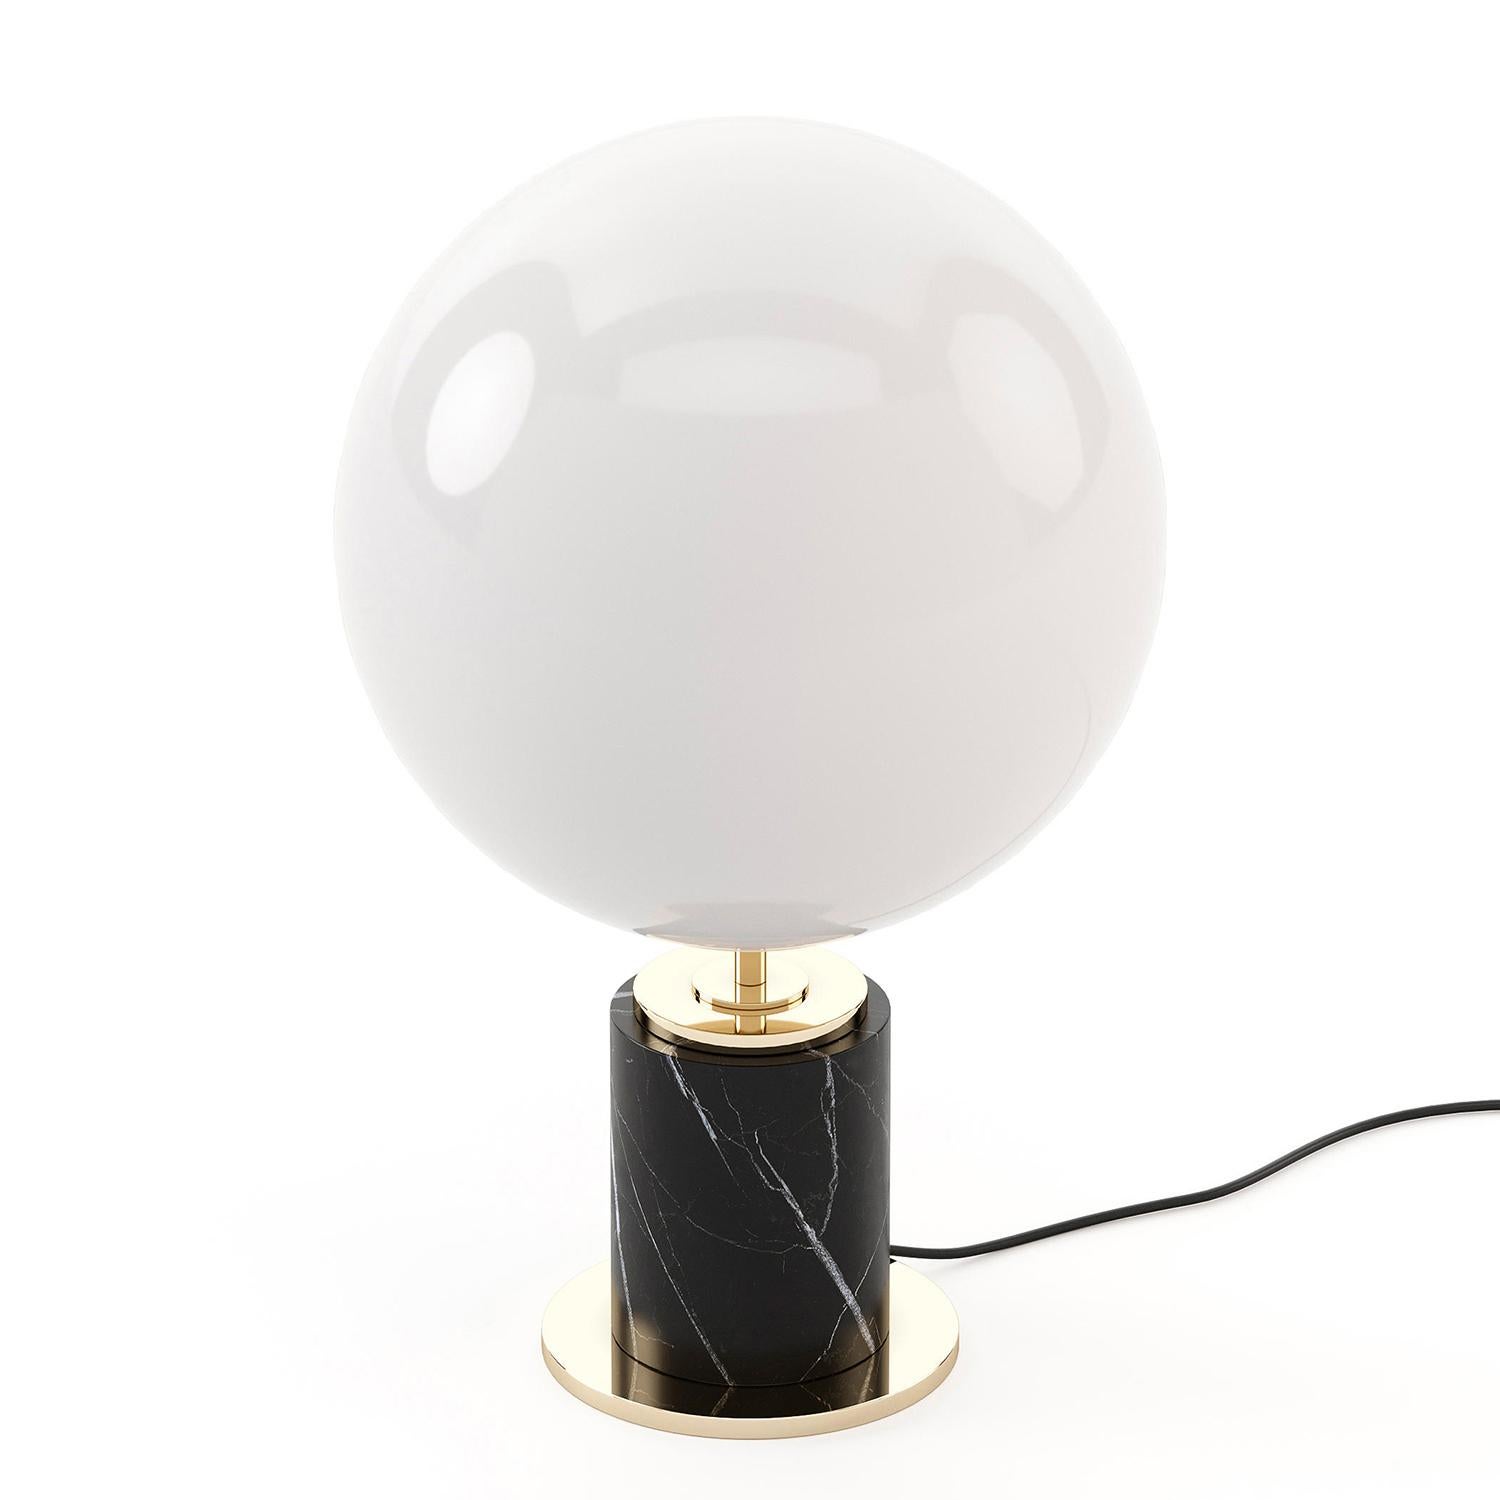 Table Lamp Globo with polished black marble base,
with polished stainless steel details and with white
glass lamp shade. with 1 bulb, bulb not included.